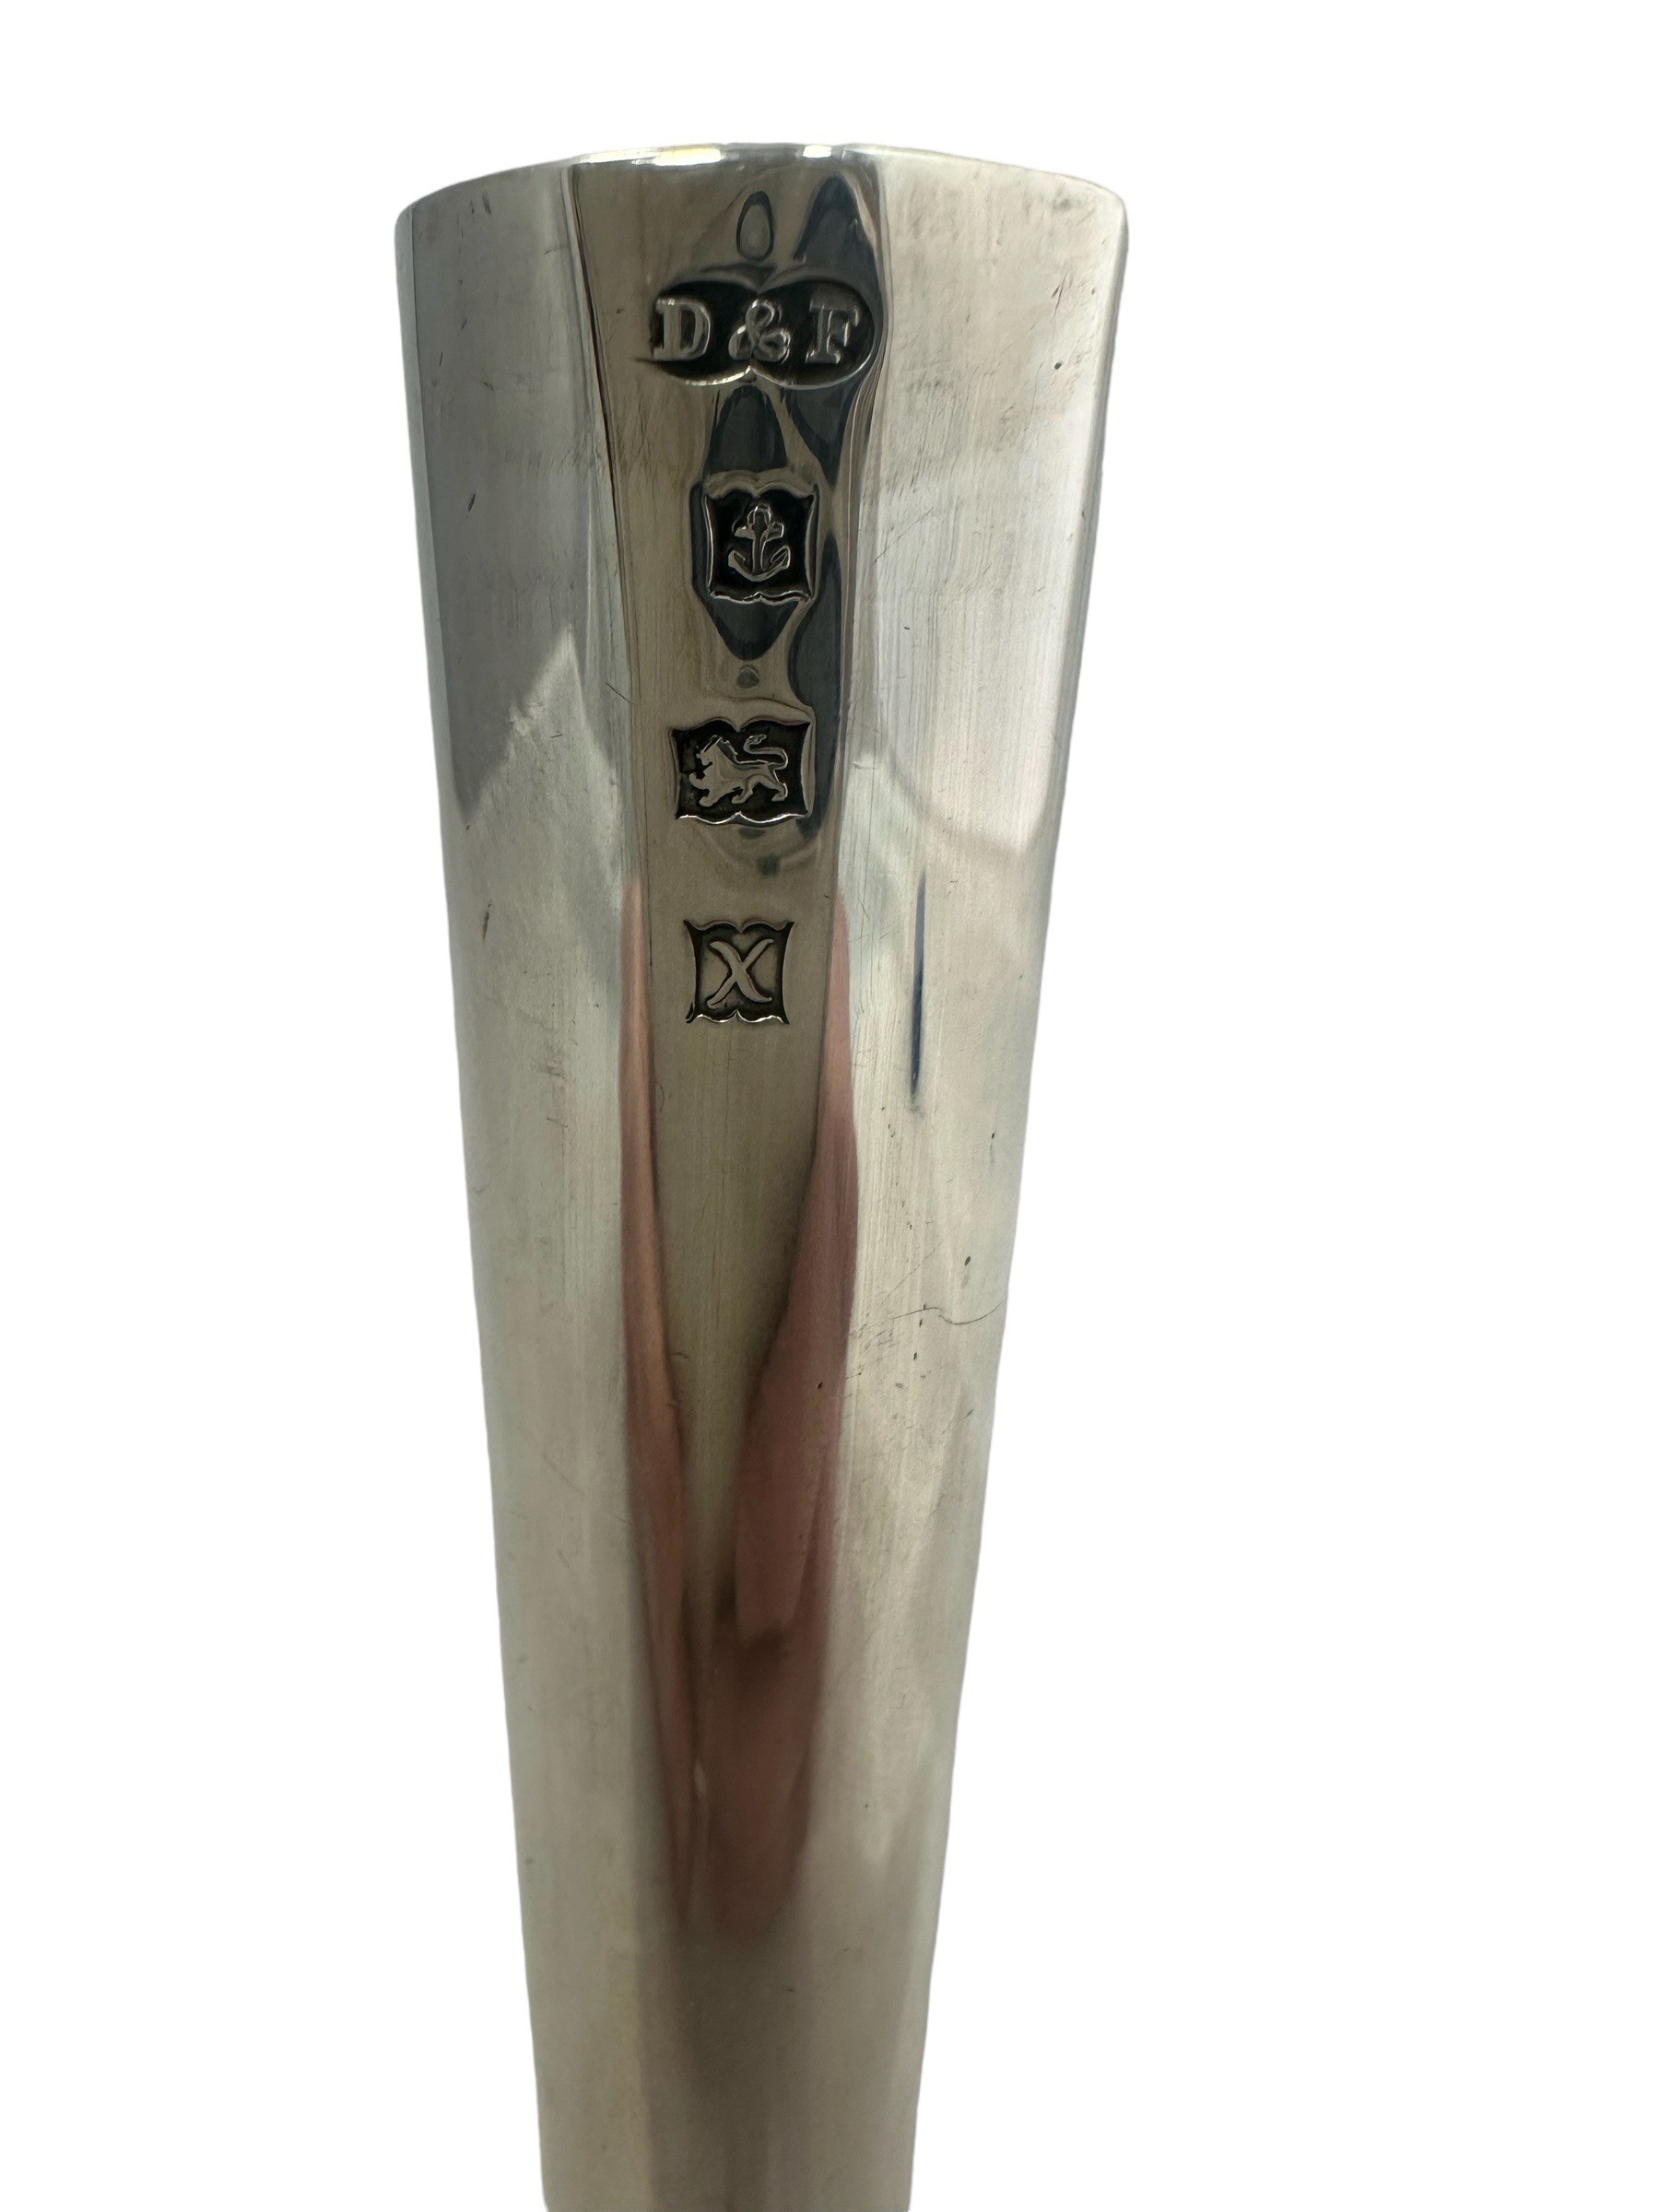 A Deakin & Francis silver bud vase with 1972 Hallmarks for Birmingham. 13.7cm approx high, 142g, - Image 3 of 3